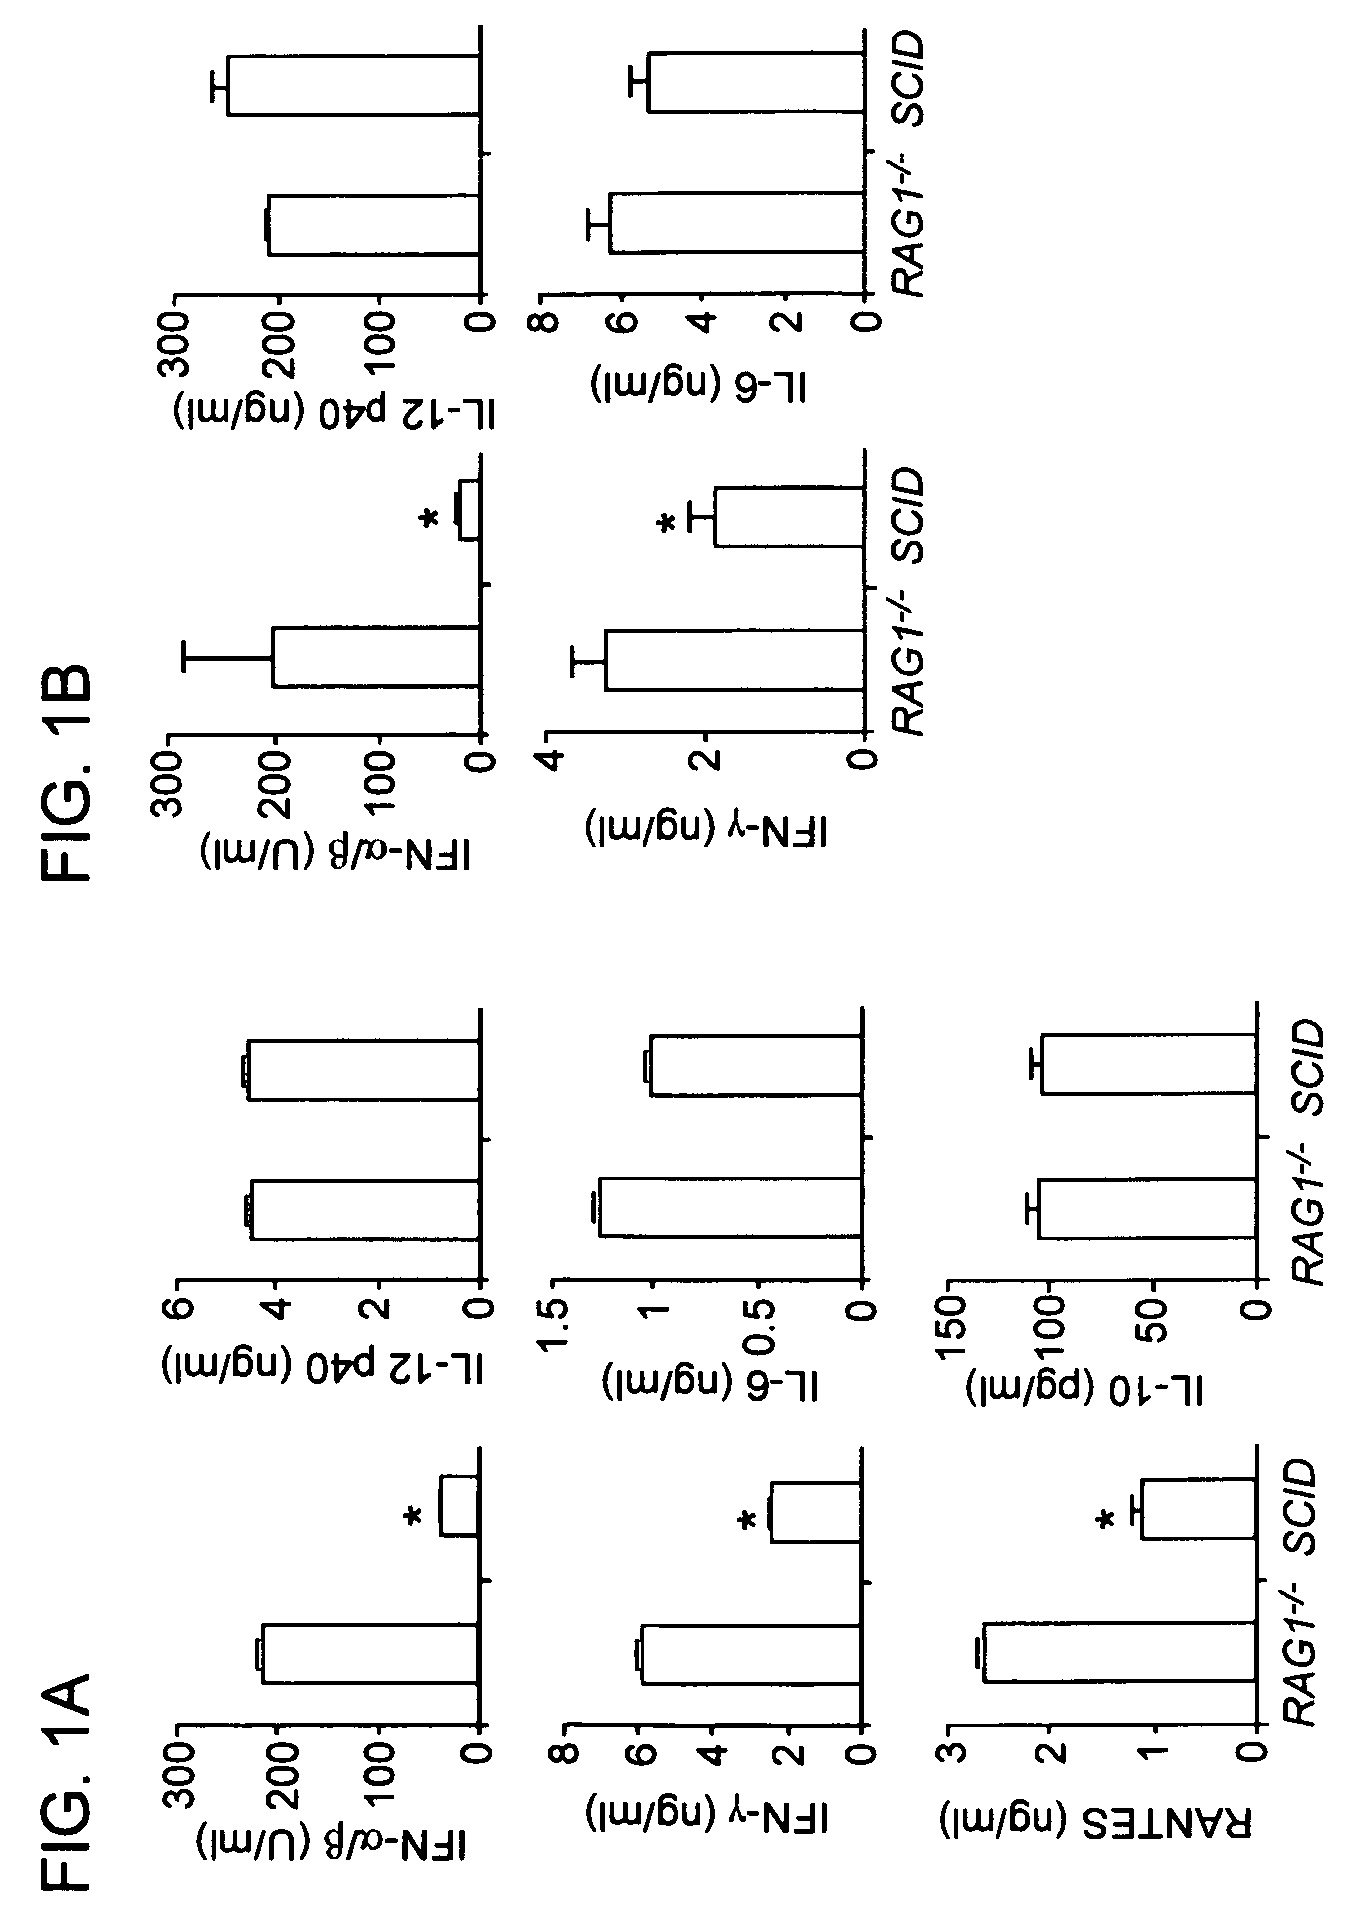 Methods of treating gastrointestinal inflammation